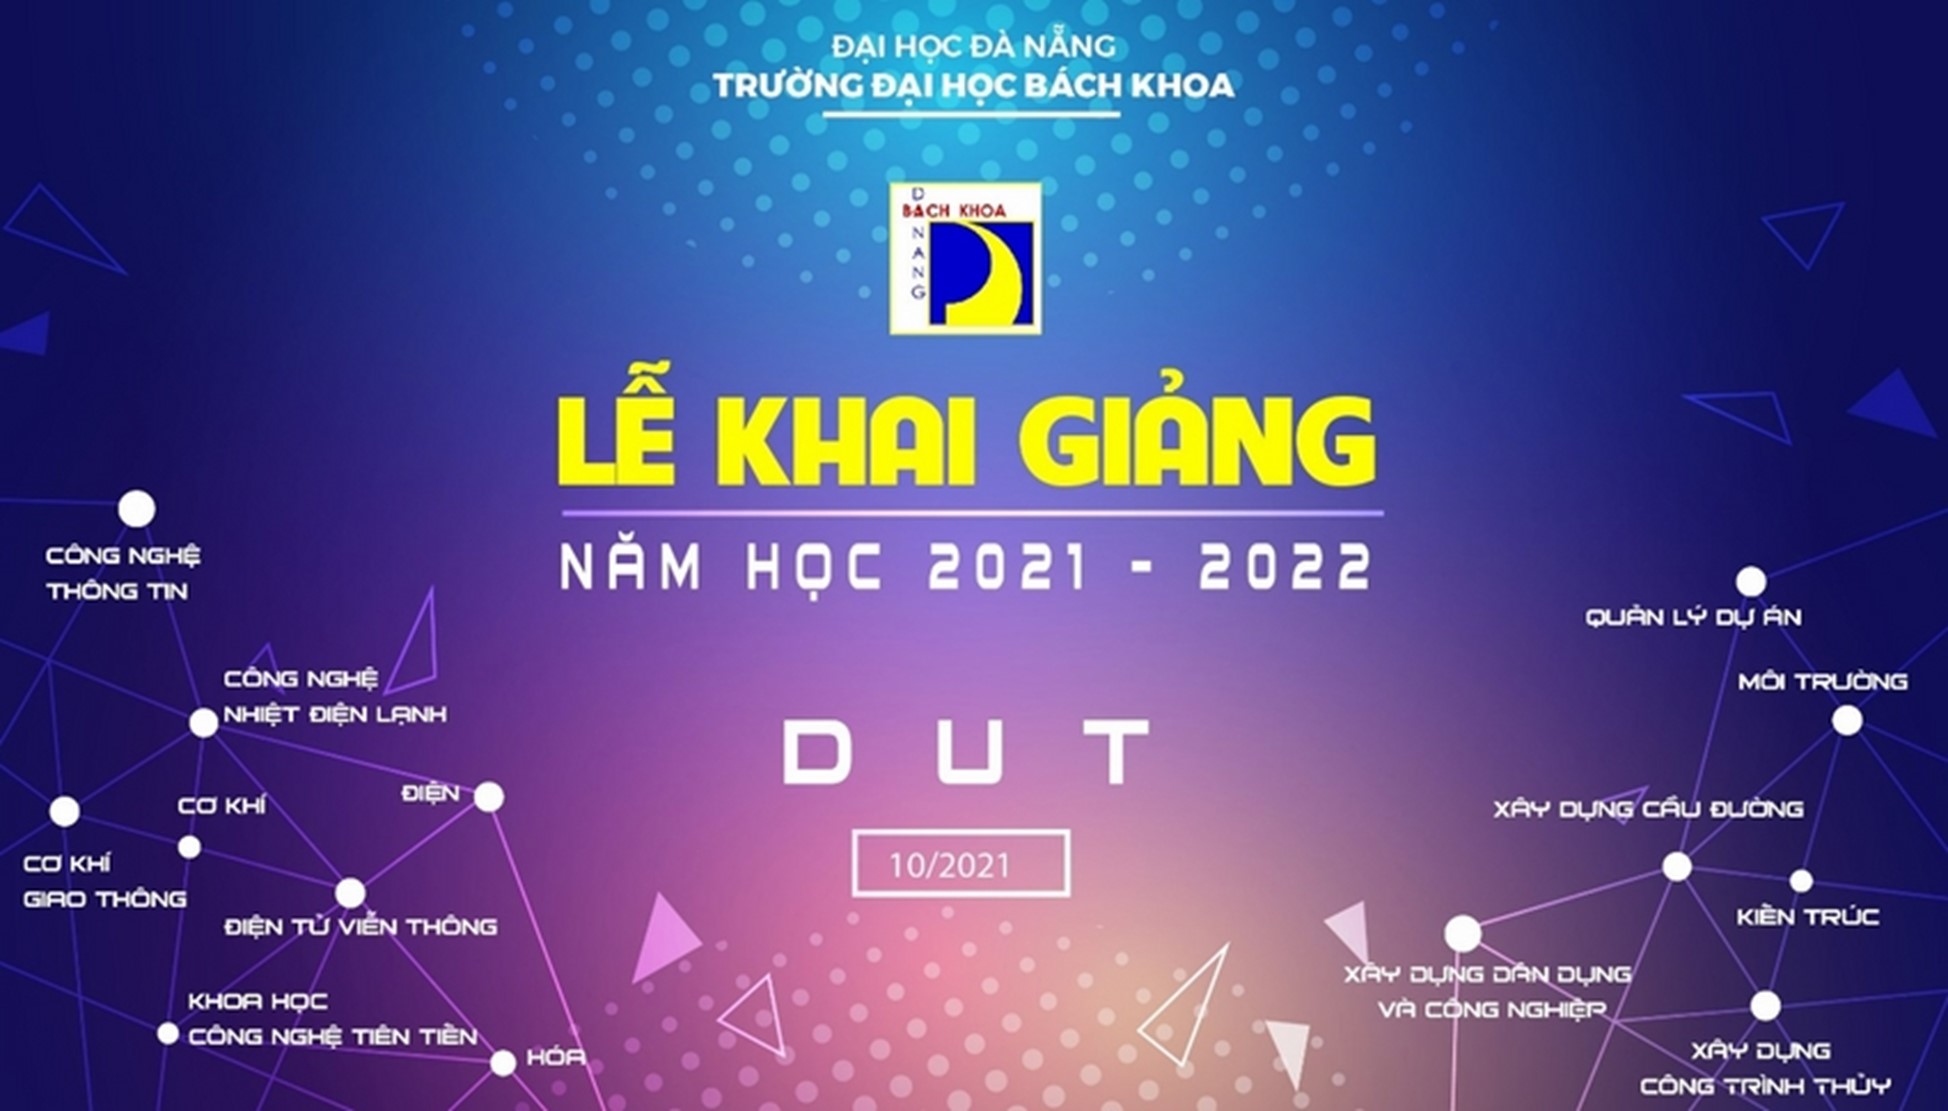 The opening ceremony with full of emotions to start the academic year 2021-2022 of the University of Science and Technology, the University of Danang